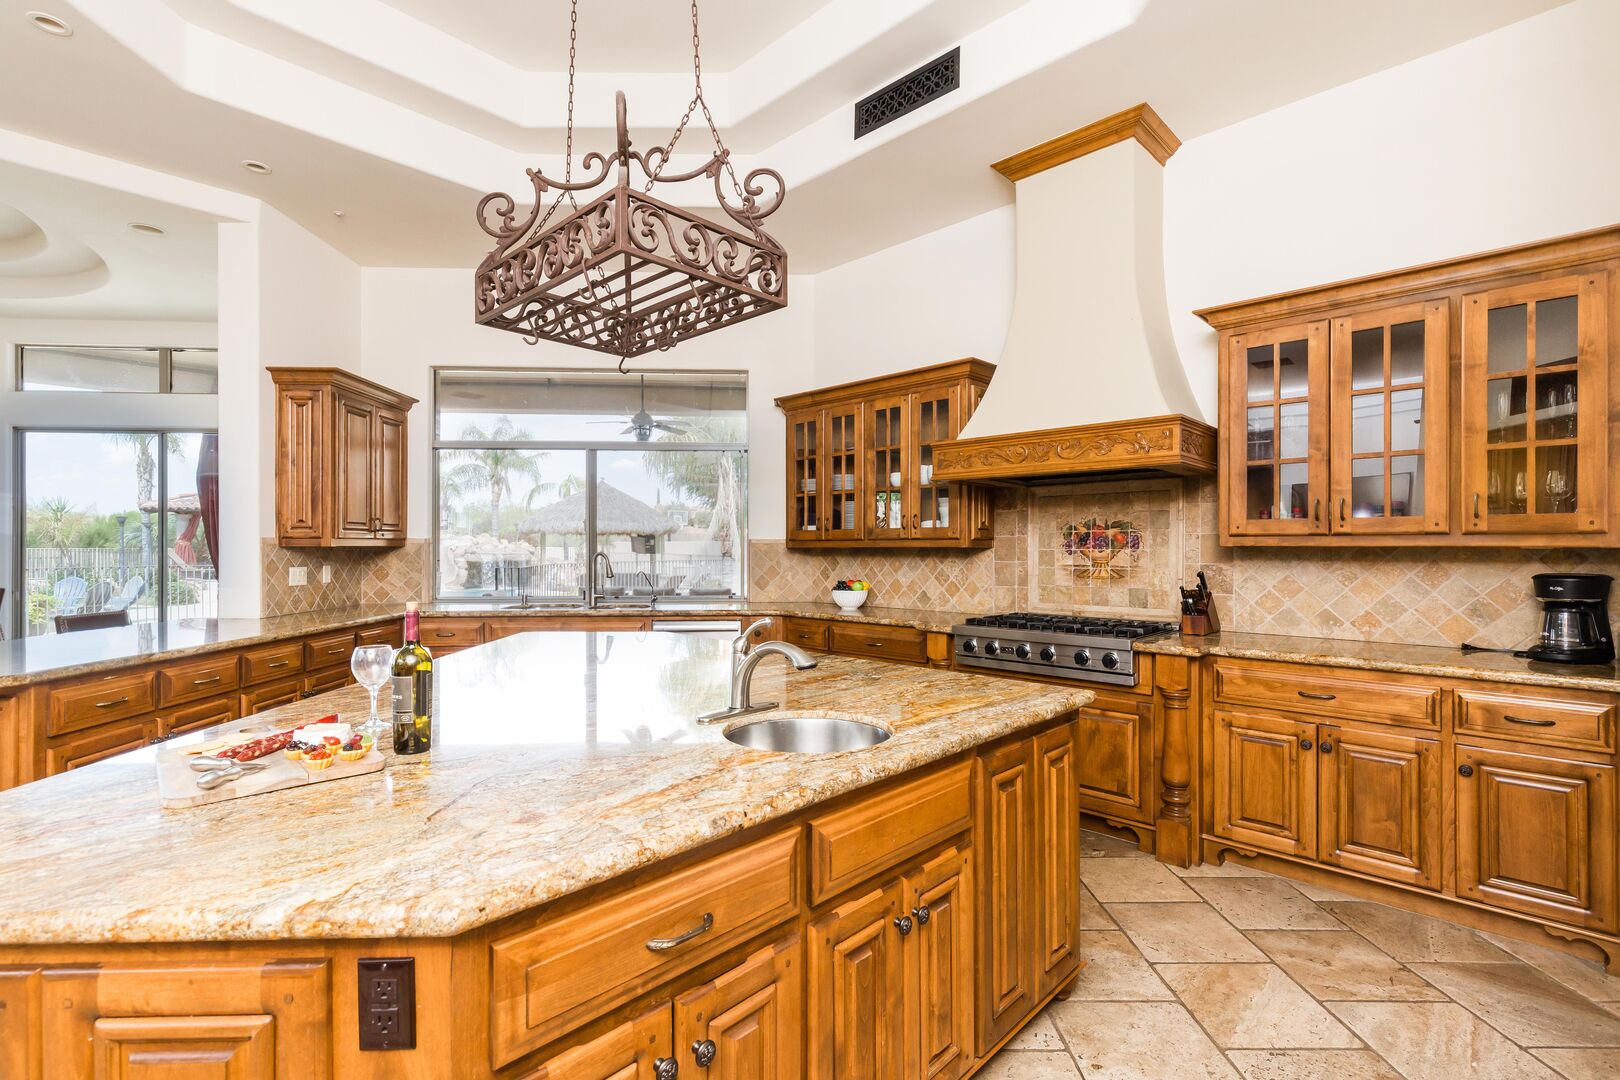 The kitchen is a chef's dream, with stainless-steel appliances, a large island with ample counter space, double oven, bar seating, and stocked with all culinary essentials.